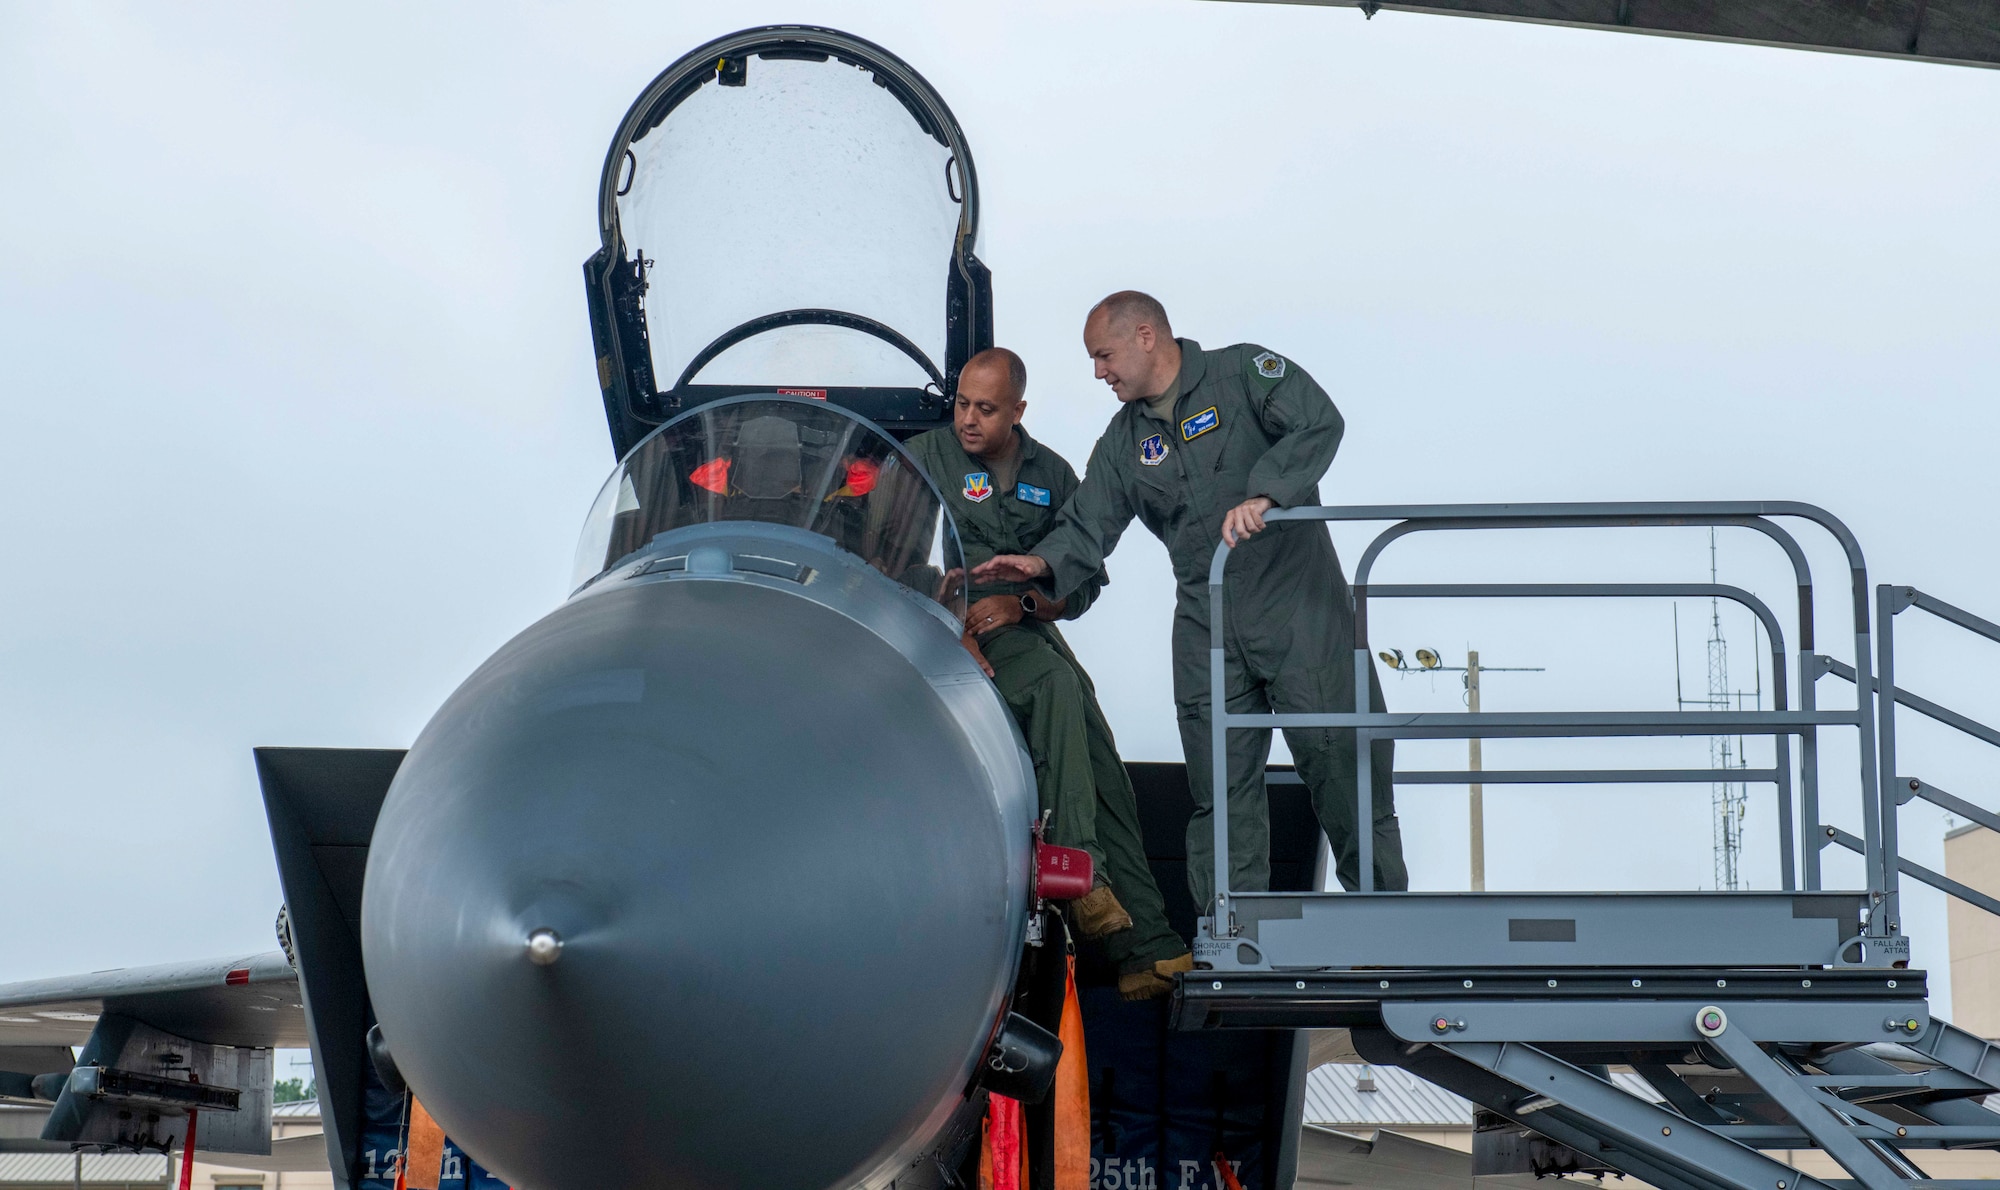 U.S. Air Force Col. Mansour Elhihi, left, commander, 125th Operations Group, 125th Fighter Wing, Florida National Guard, highlights components of the F-15C Eagle aircraft to Maj. Gen. Duke Pirak, deputy director, Air National Guard, during a unit visit to the Jacksonville Air National Guard Base, FL, Sept. 13, 2022. During his visit, Pirak received a mission brief and update on the long-awaited F-35A Lightning II conversion. (U.S. Air National Guard photo by Tech. Sgt. Chelsea Smith)